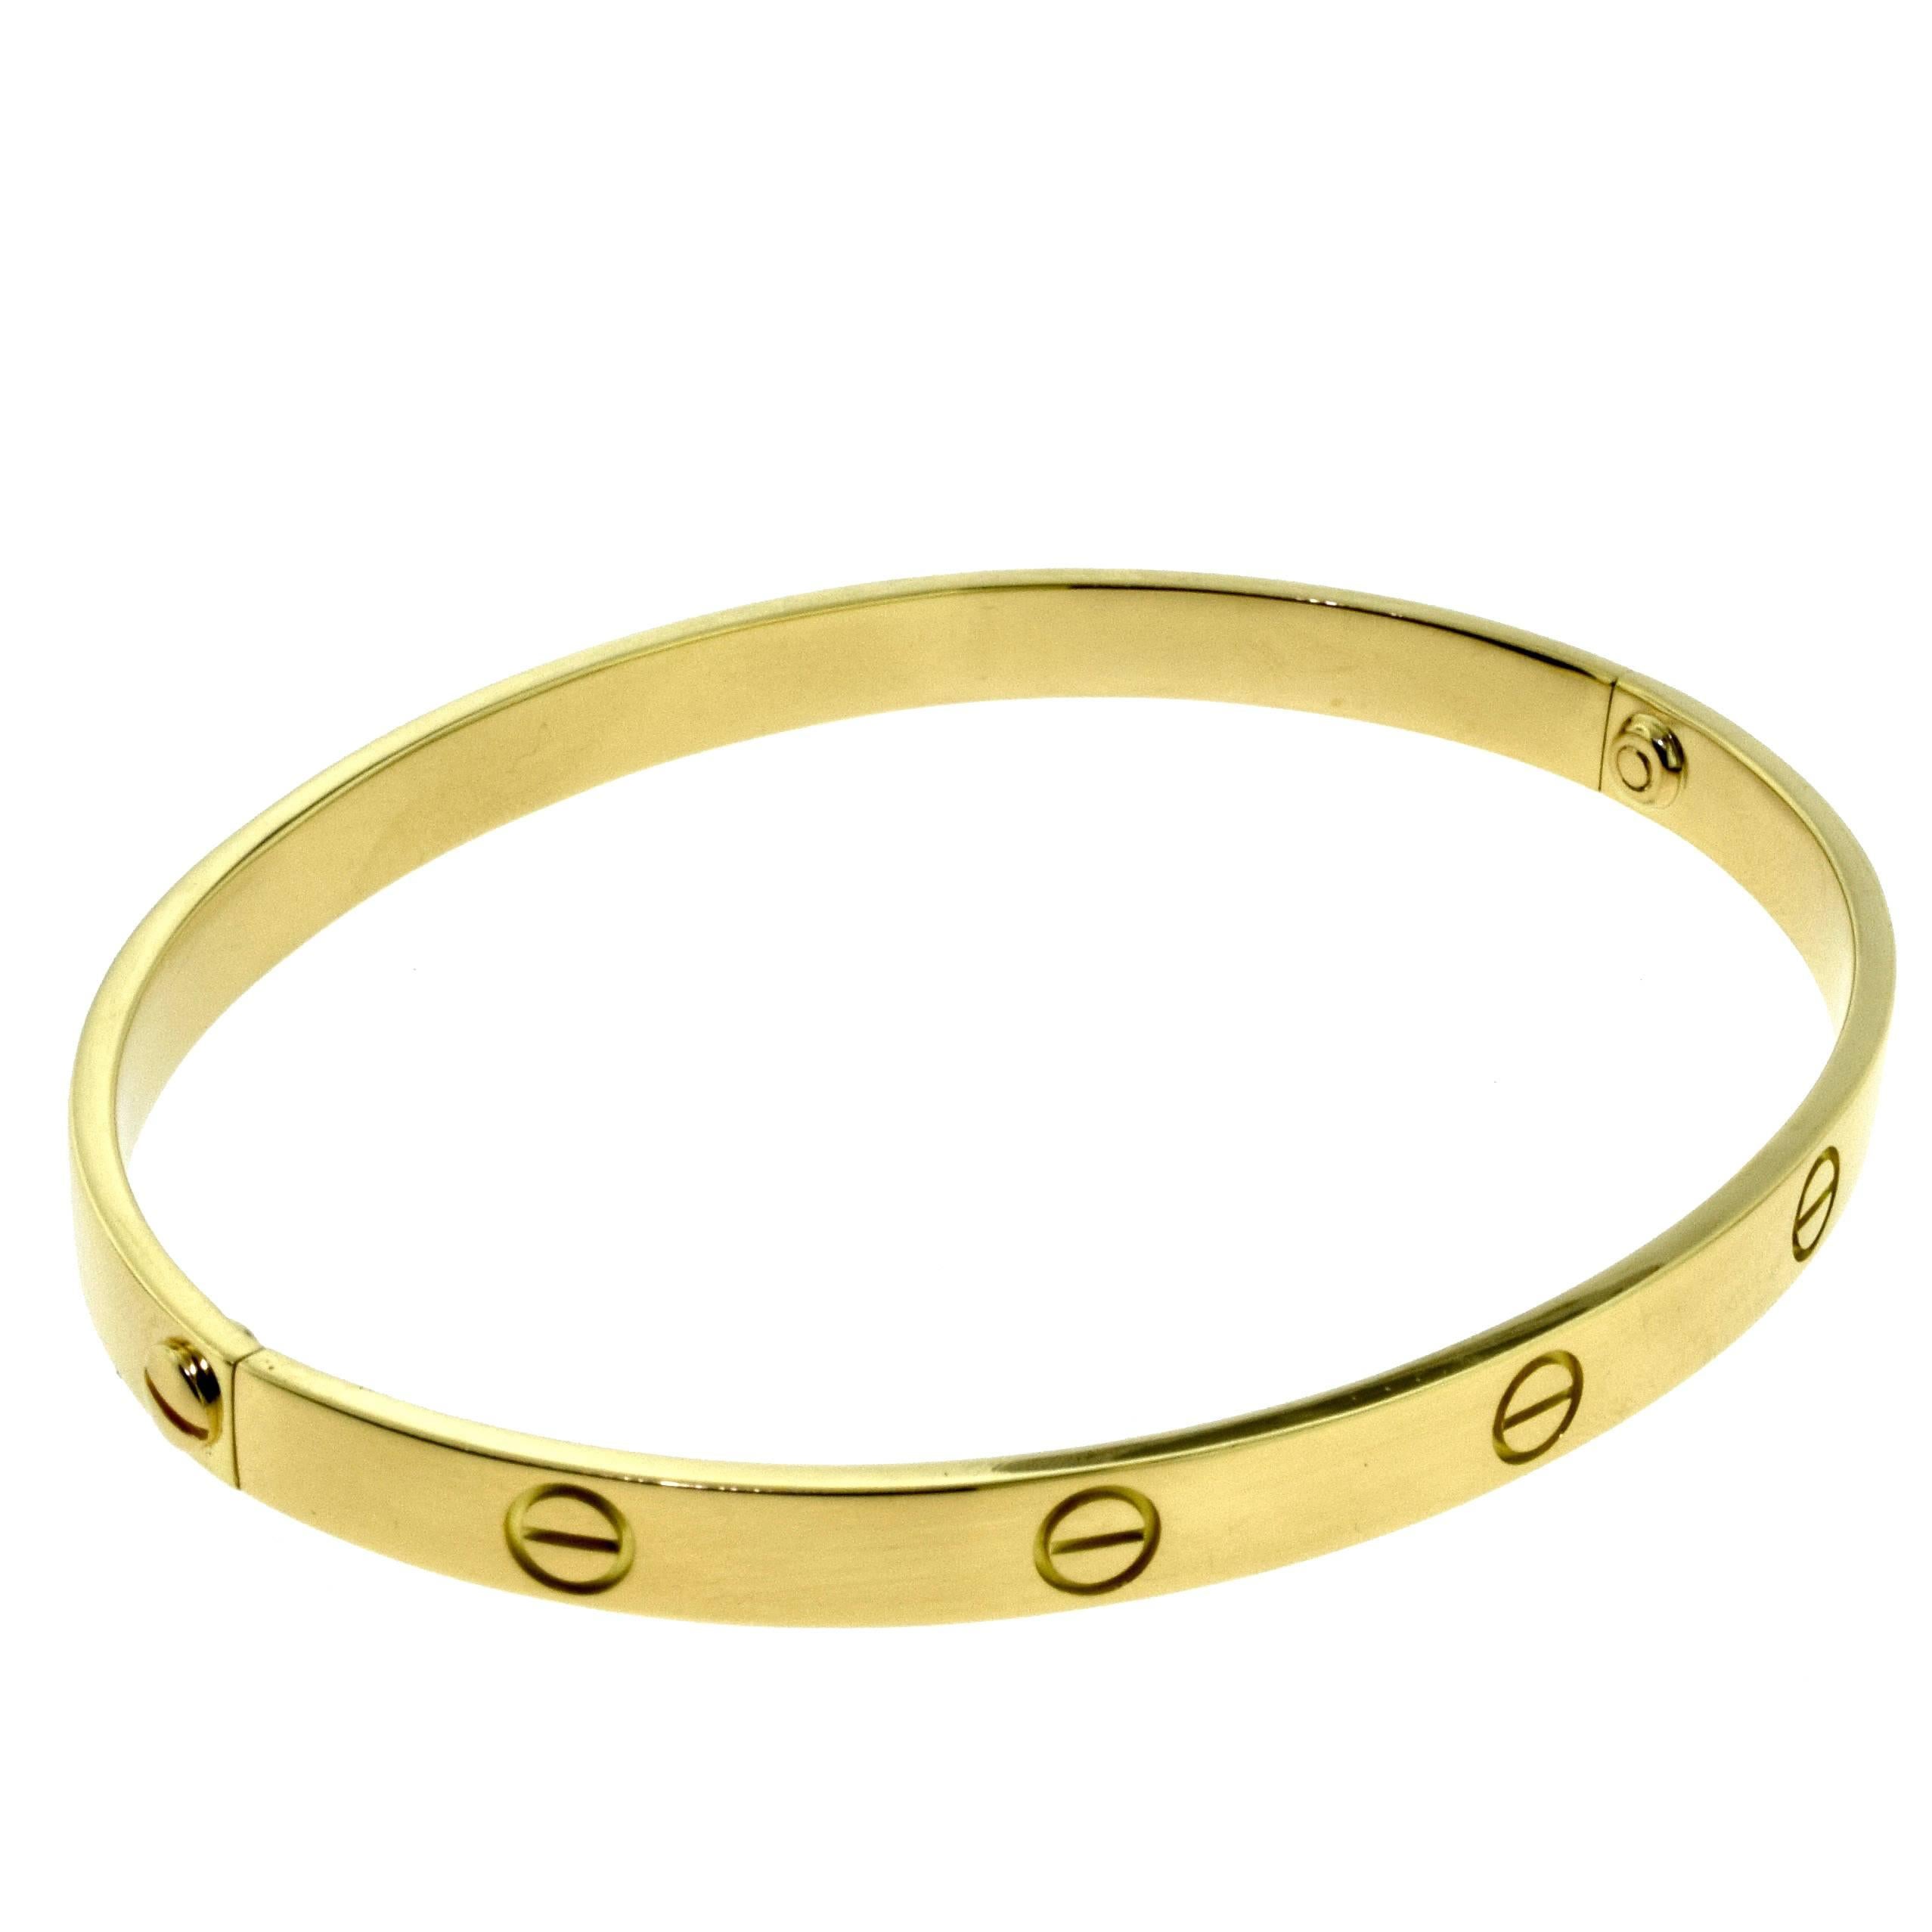 Cartier Love Bracelet in 18 Karat Yellow Gold In Excellent Condition For Sale In Miami, FL